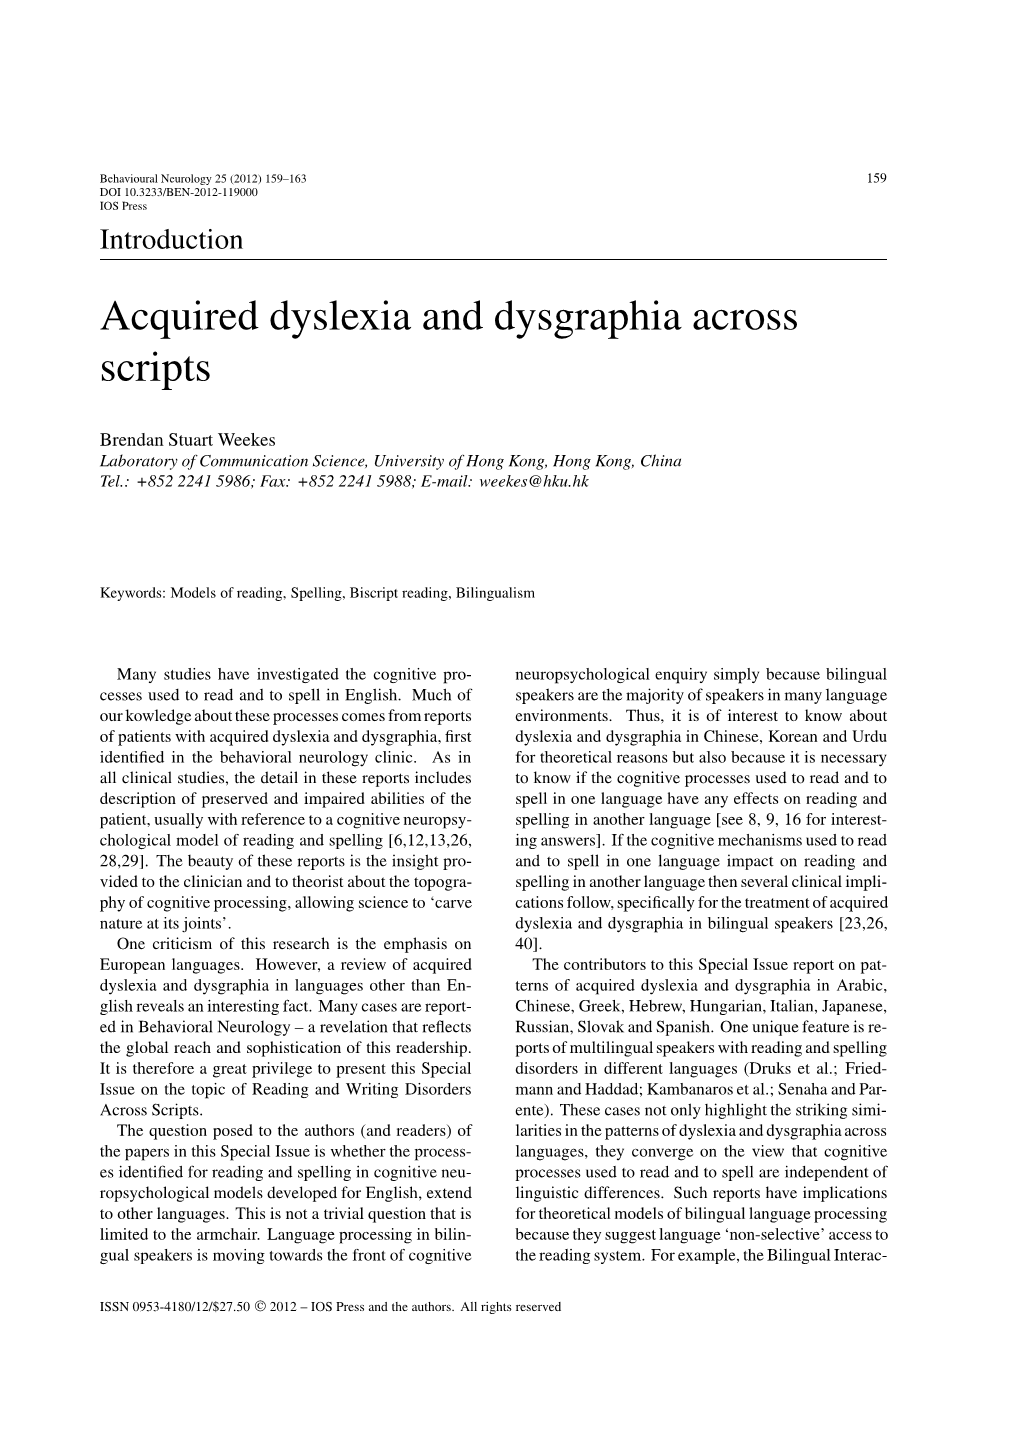 Acquired Dyslexia and Dysgraphia Across Scripts